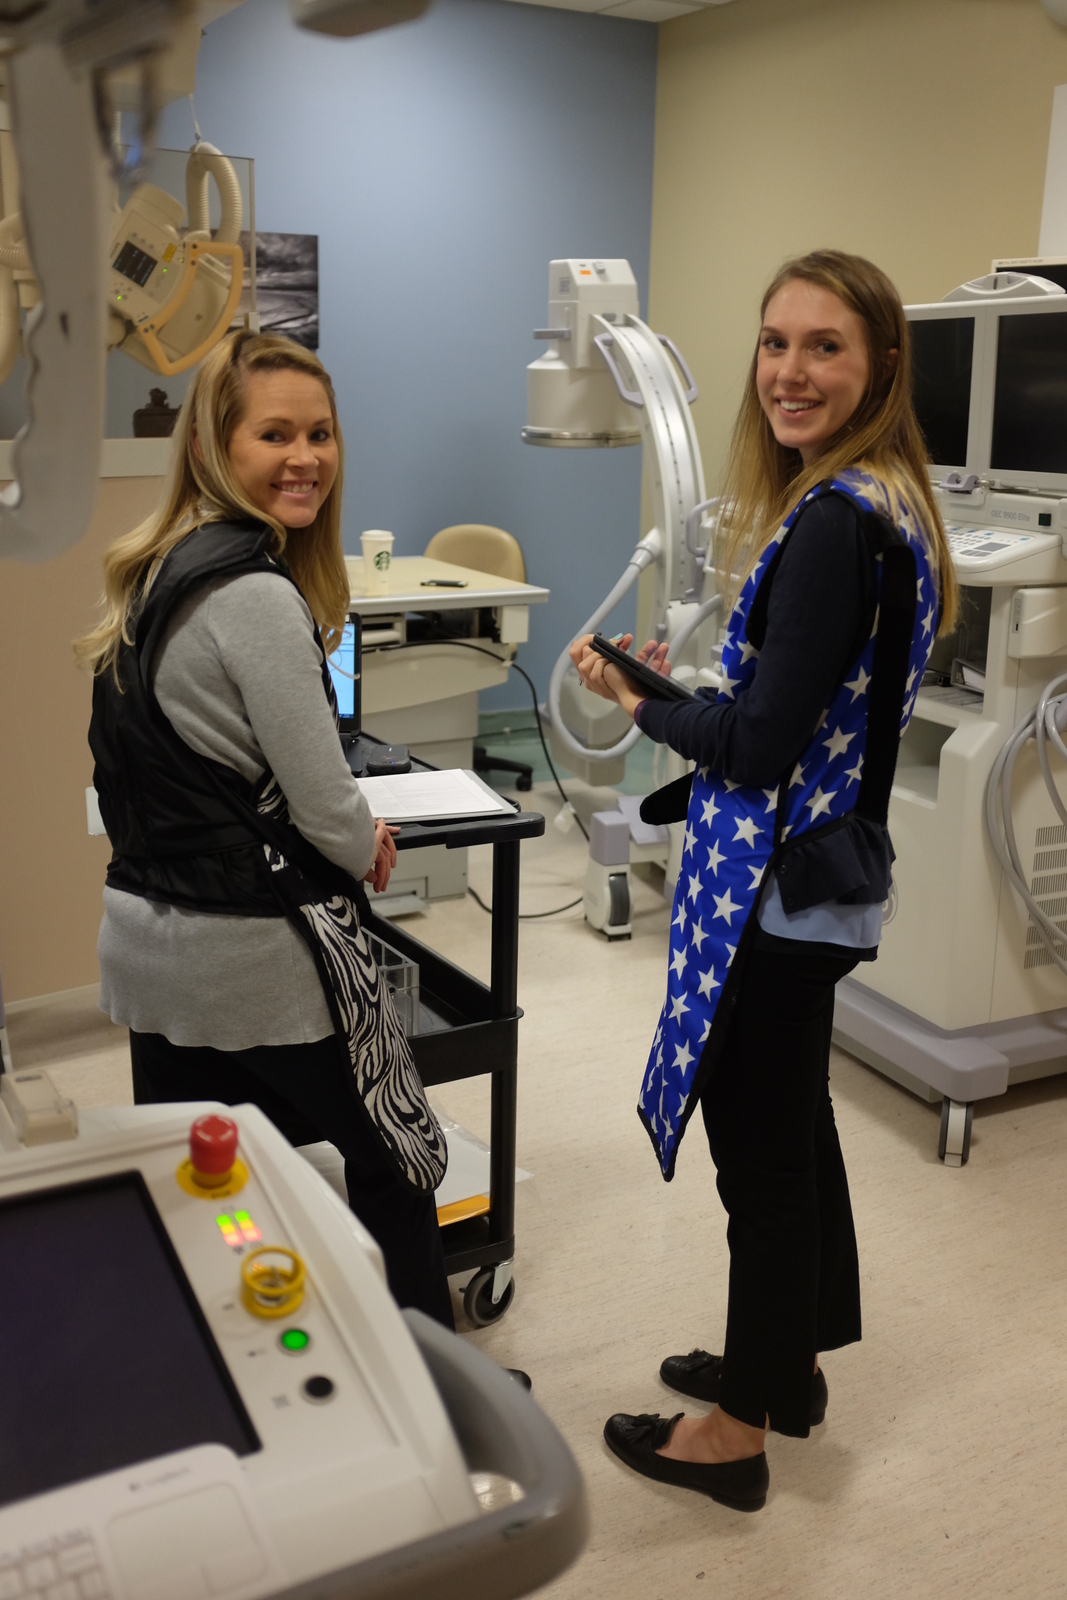 Diagnostic Imaging Physicist Lindsey DeWeese, Ph.D. with student in Imaging room.